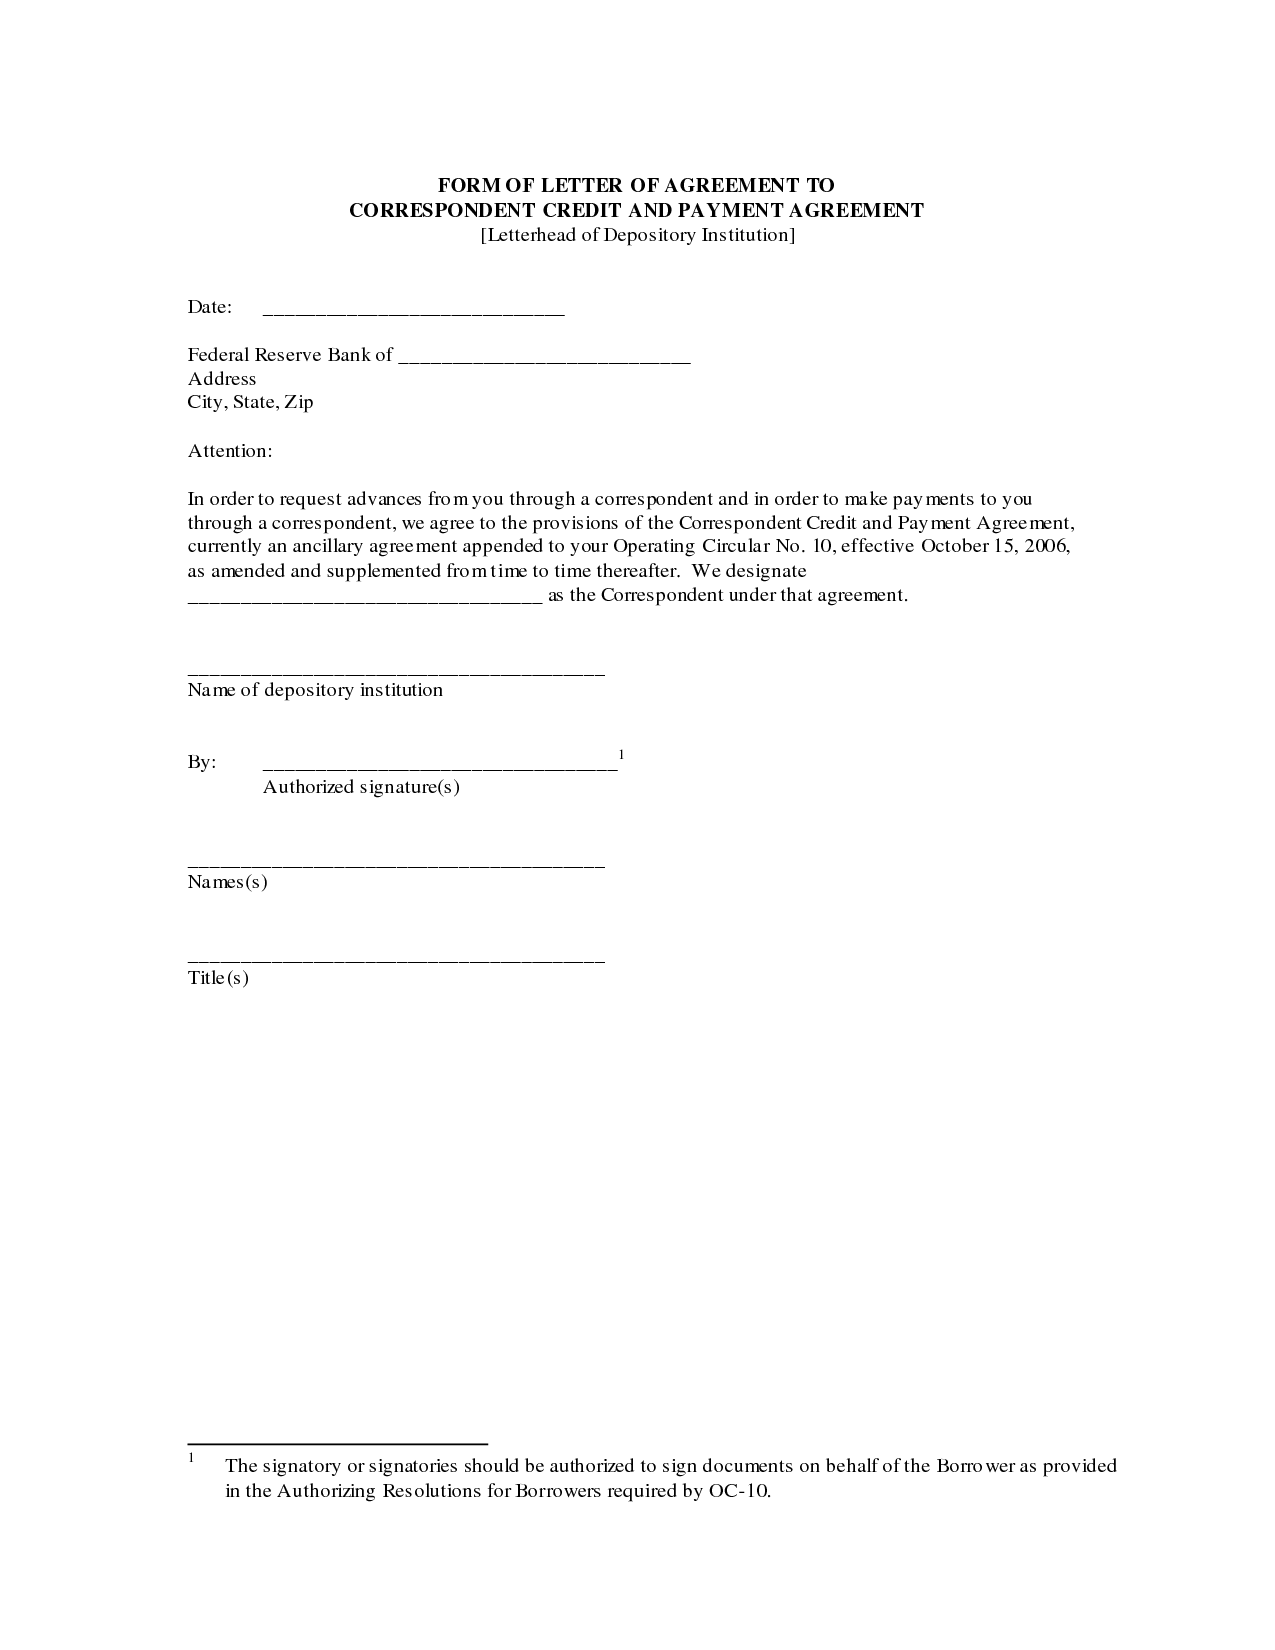 agreement-letter-free-printable-documents